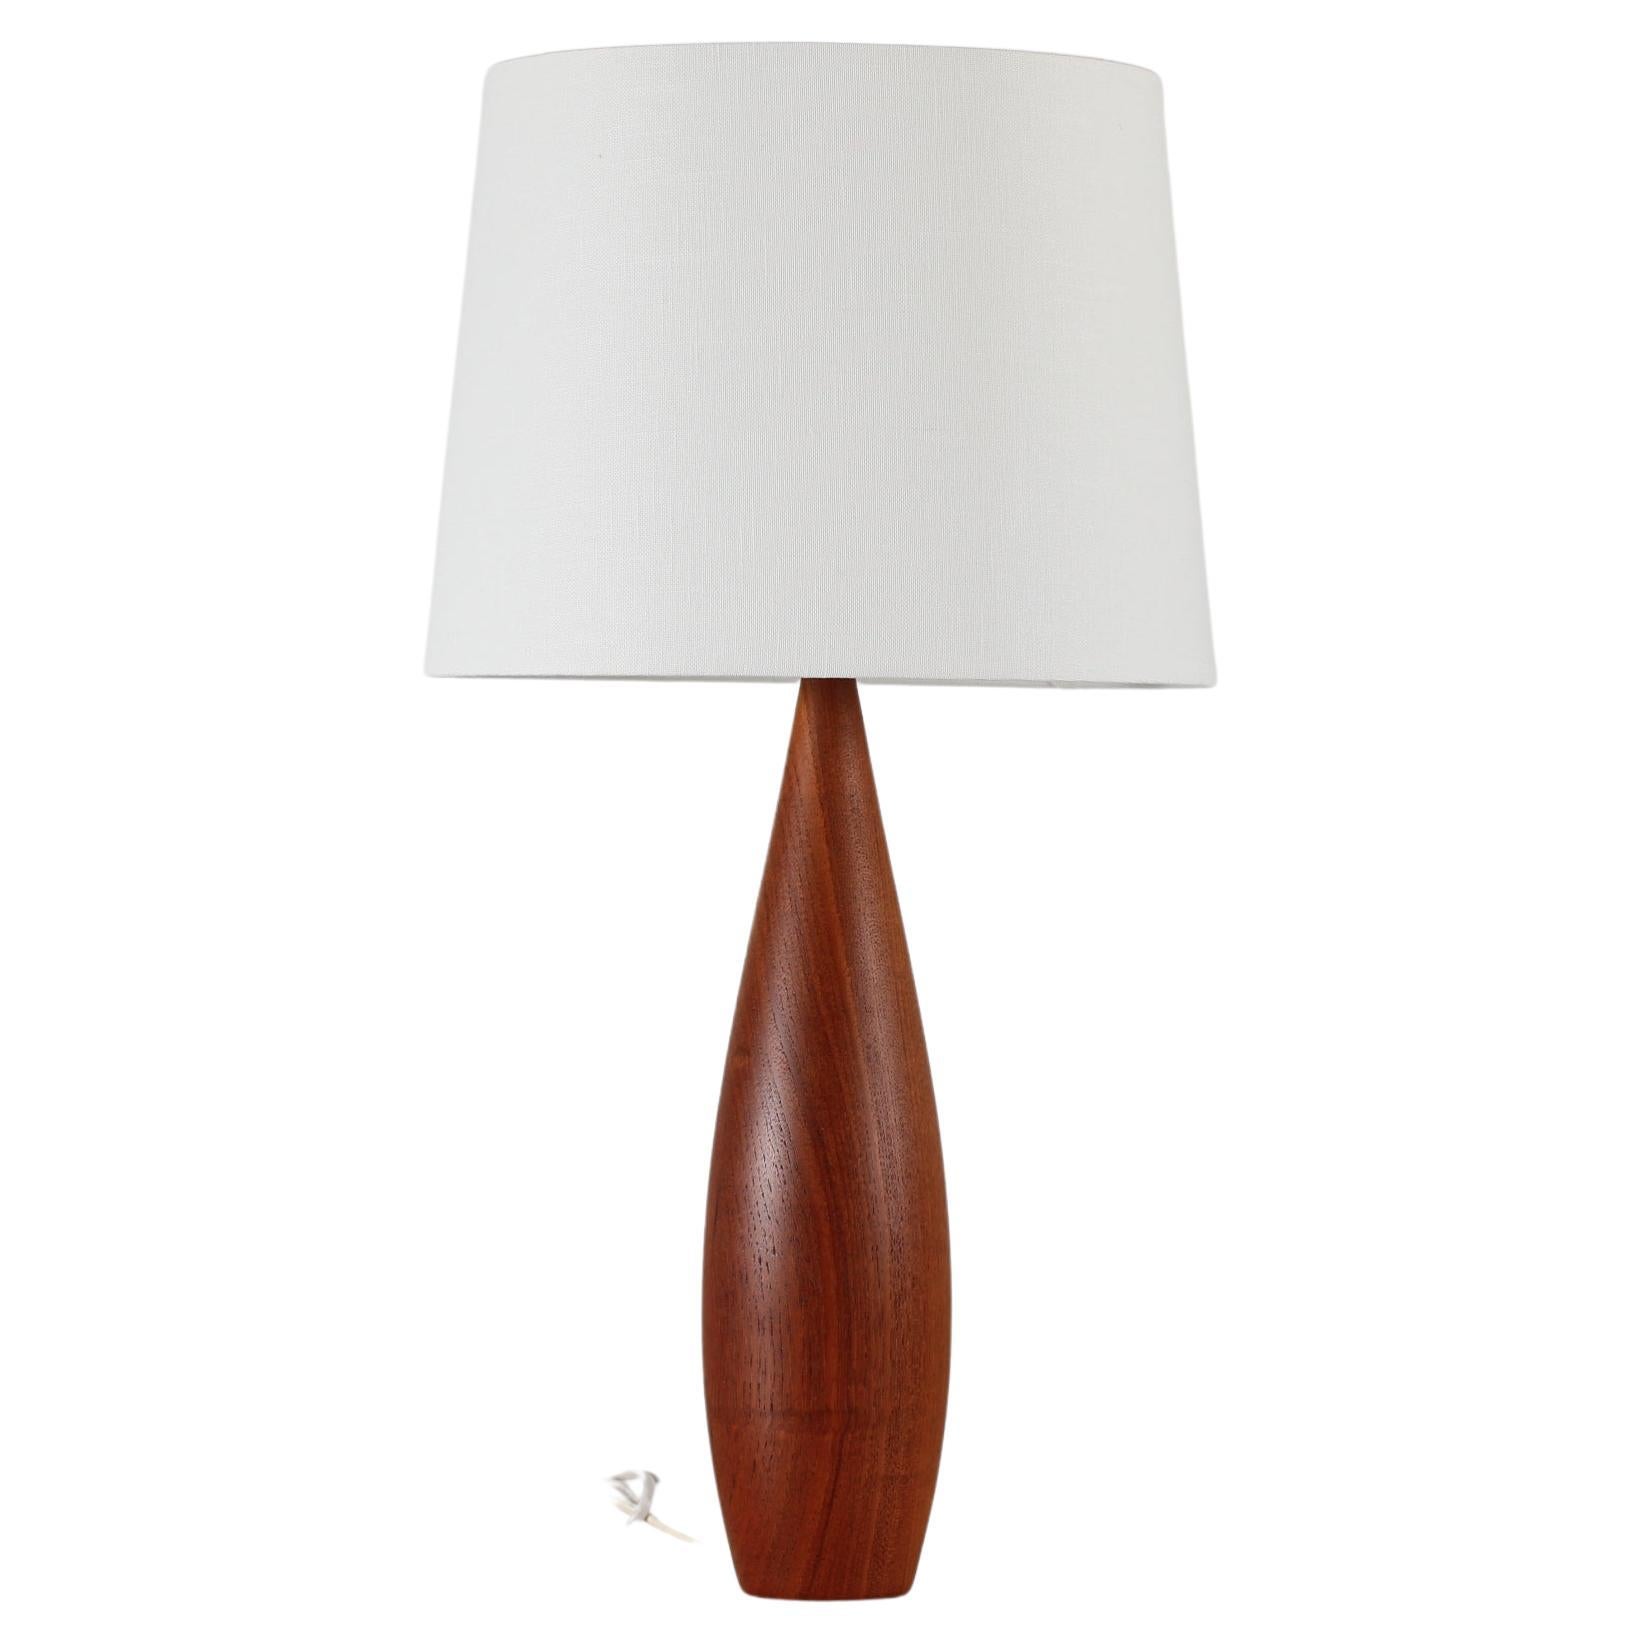 Vintage Tall Table Lamp of Hand-Turned Teak with New Shade, Scandinavian, 1960s